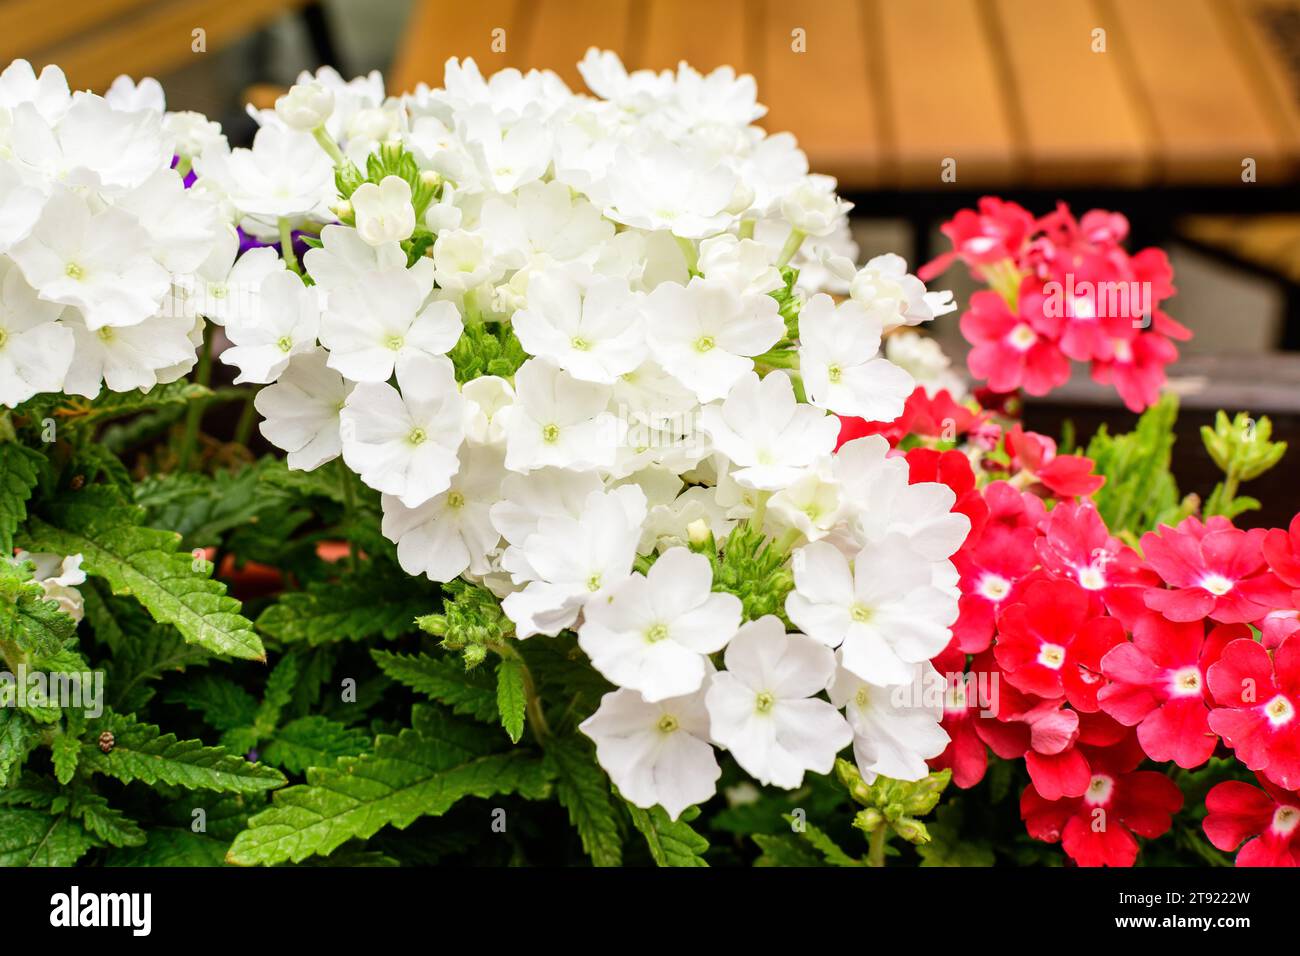 Delicate white and vivid red flowers of Verbena Hybrida Nana Compacta plant in small garden pots displayed for sale at a market in a sunny summer day Stock Photo